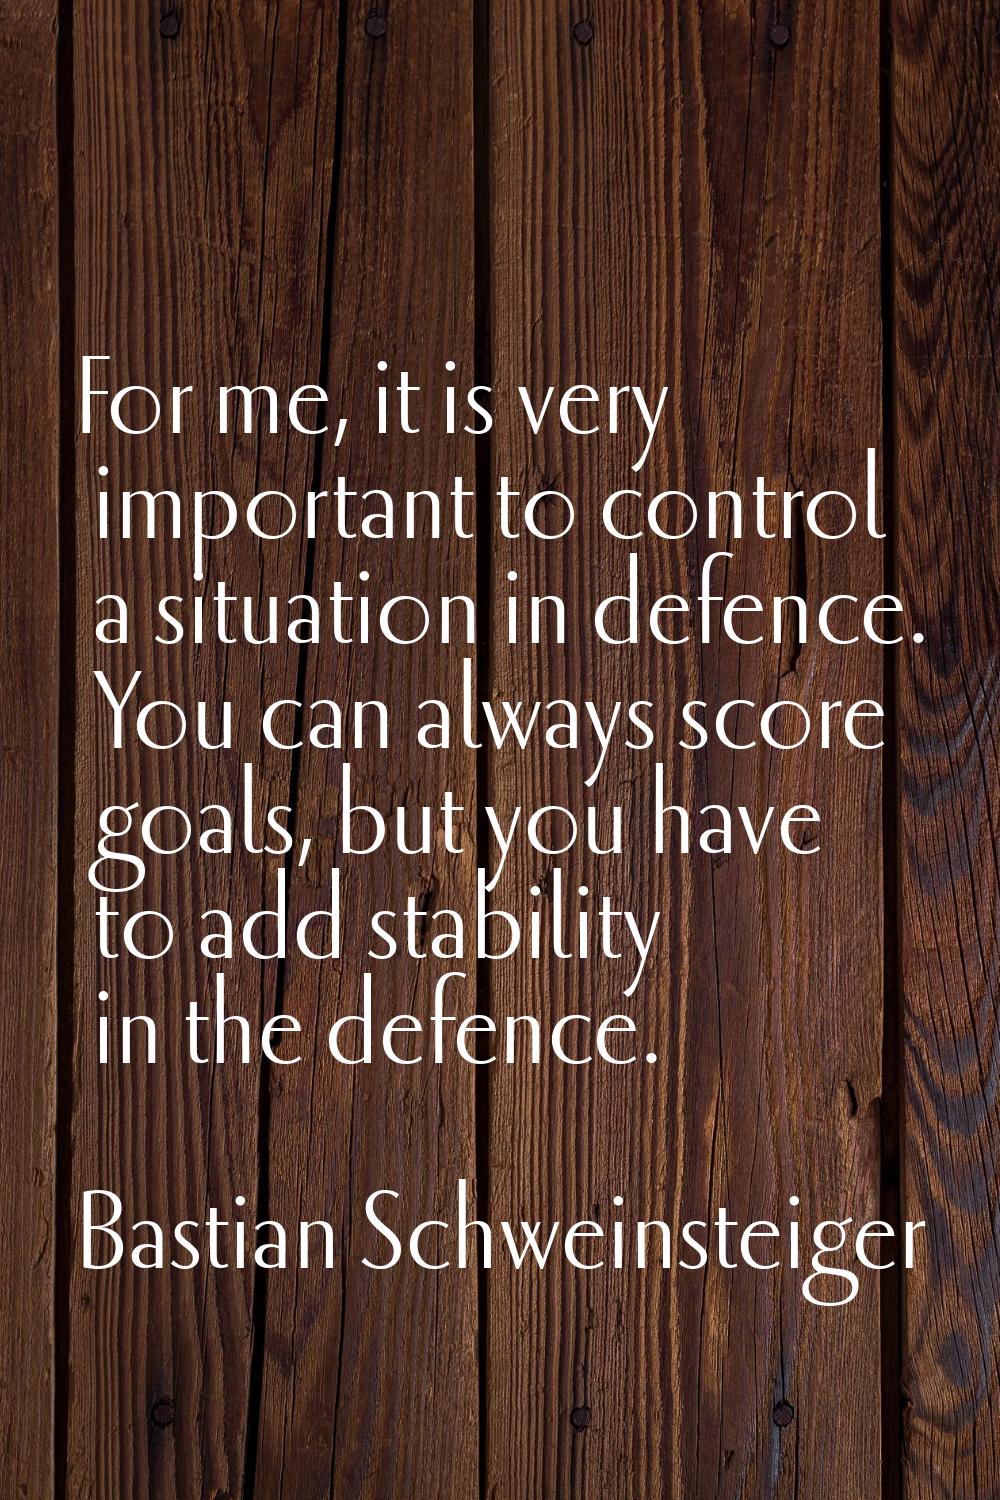 For me, it is very important to control a situation in defence. You can always score goals, but you